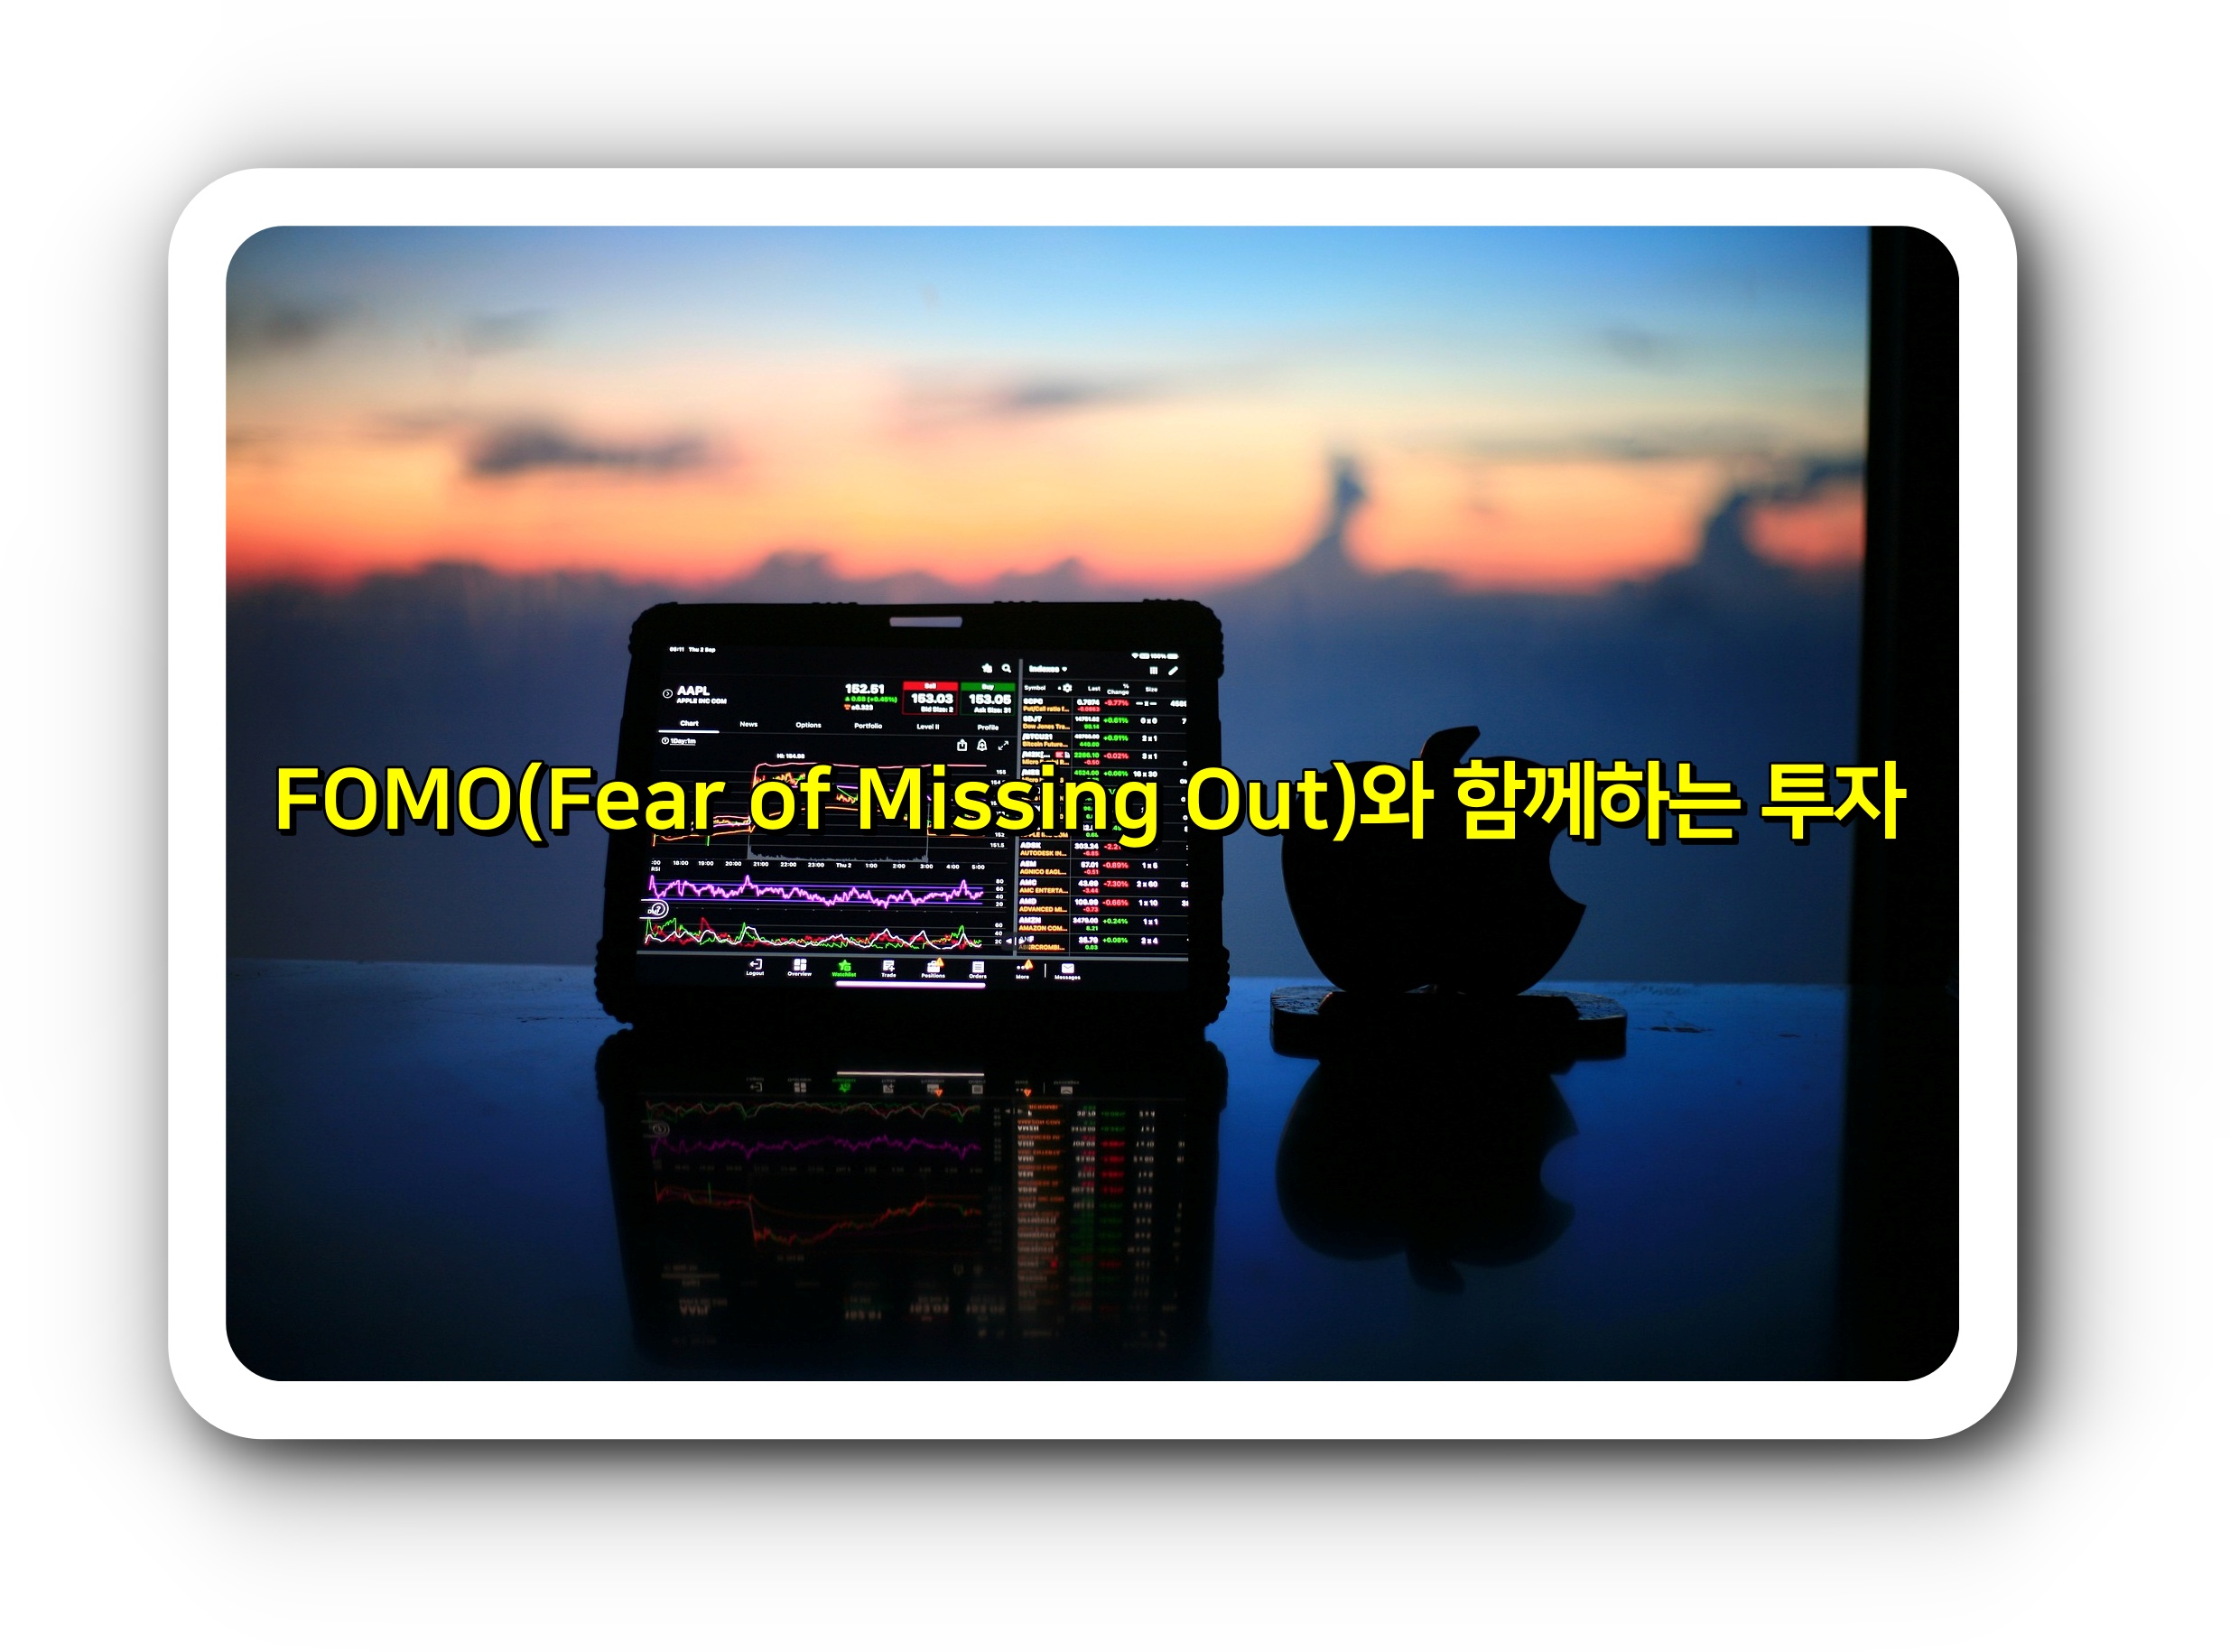 FOMO(Fear of Missing Out)와 함께하는 투자